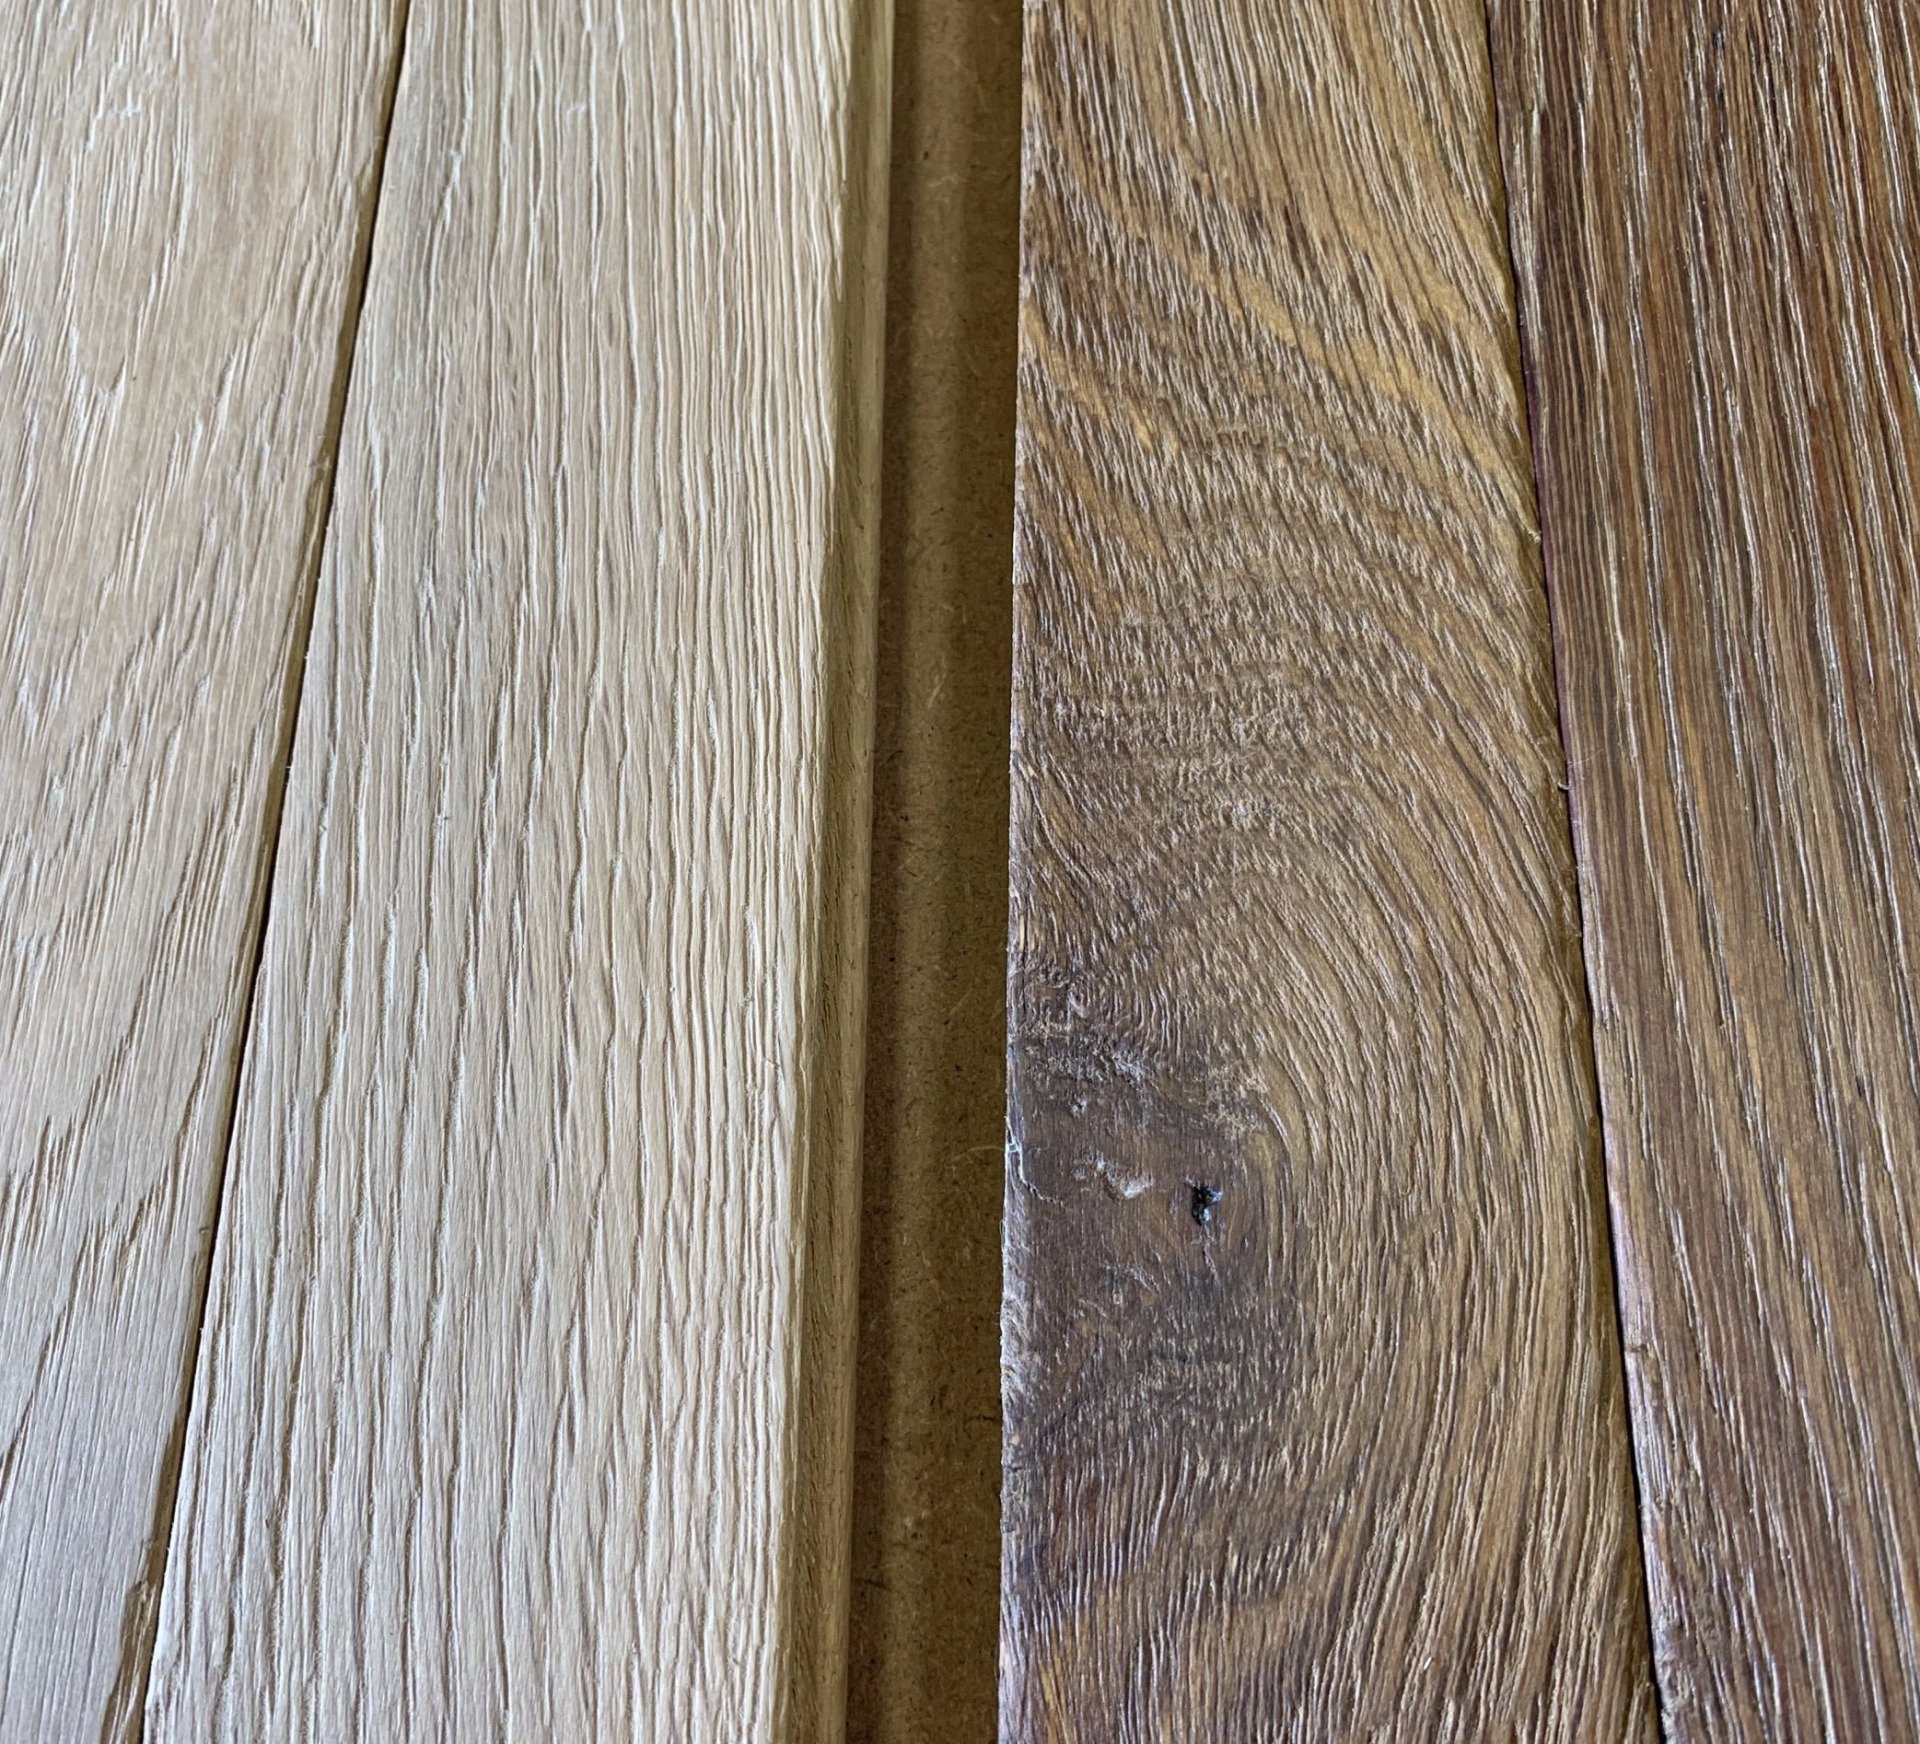 Achieving the Fumed Look on White Oak